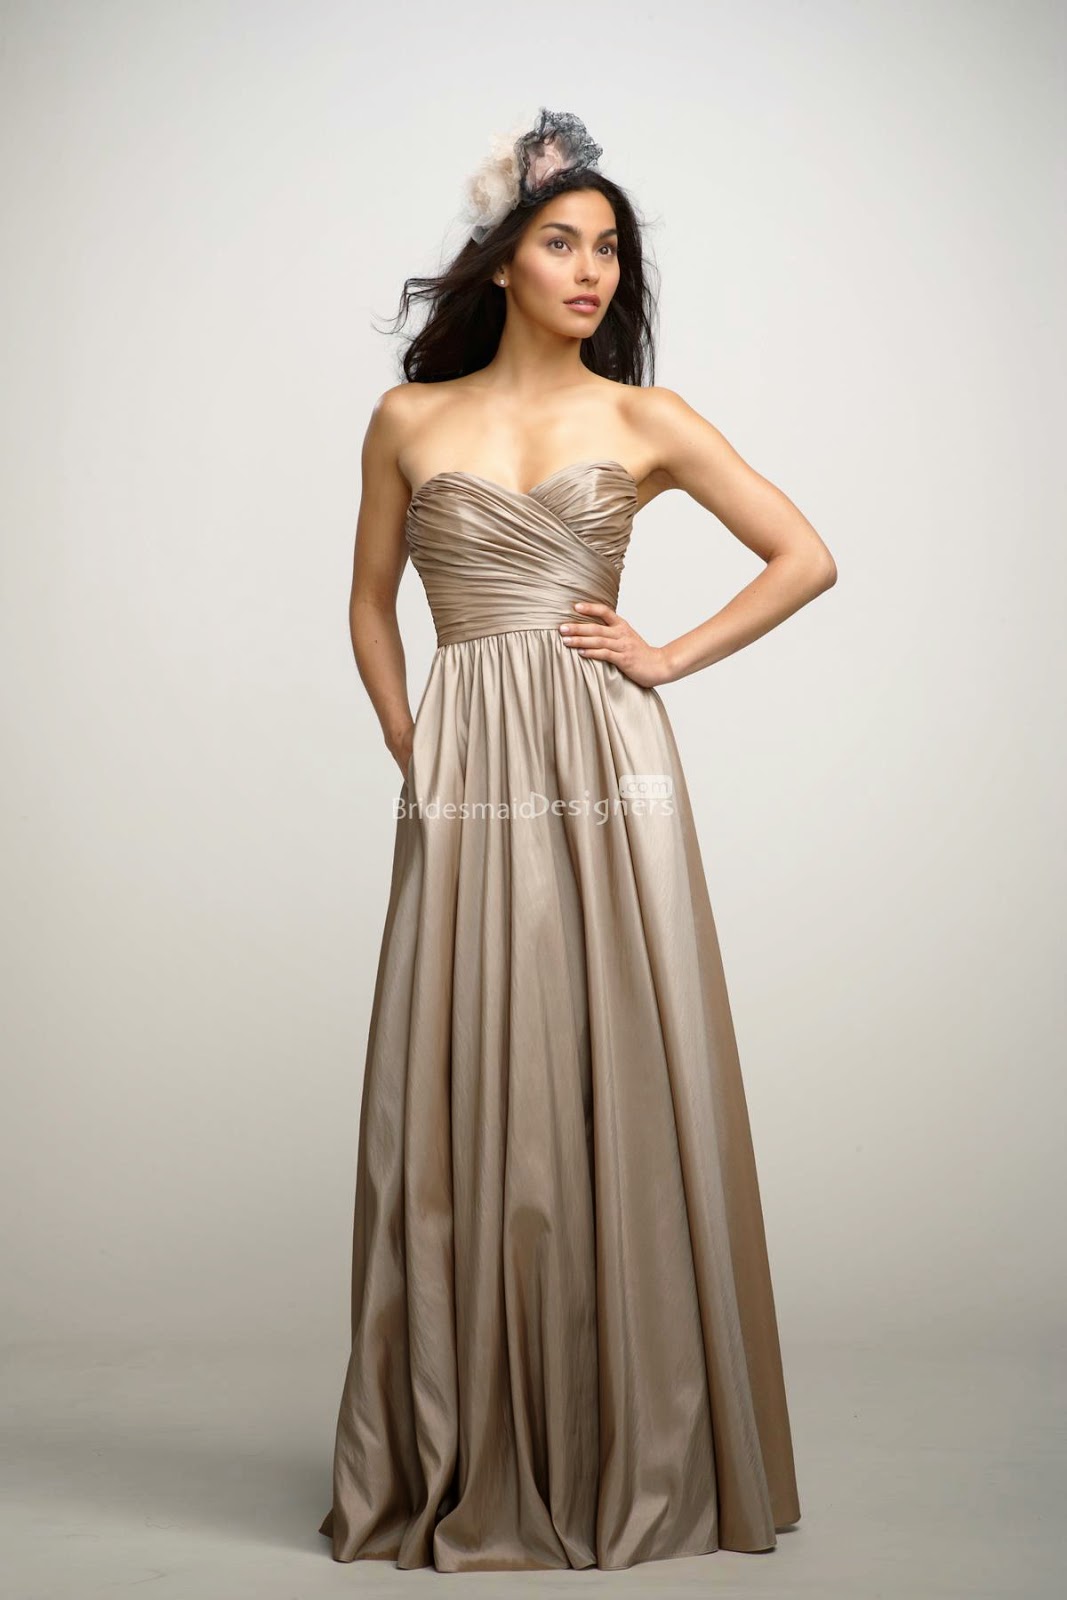 http://www.bridesmaiddesigners.com/champagne-sheath-floor-length-sweetheart-long-bridesmaid-dress-with-ruched-bodice-382.html